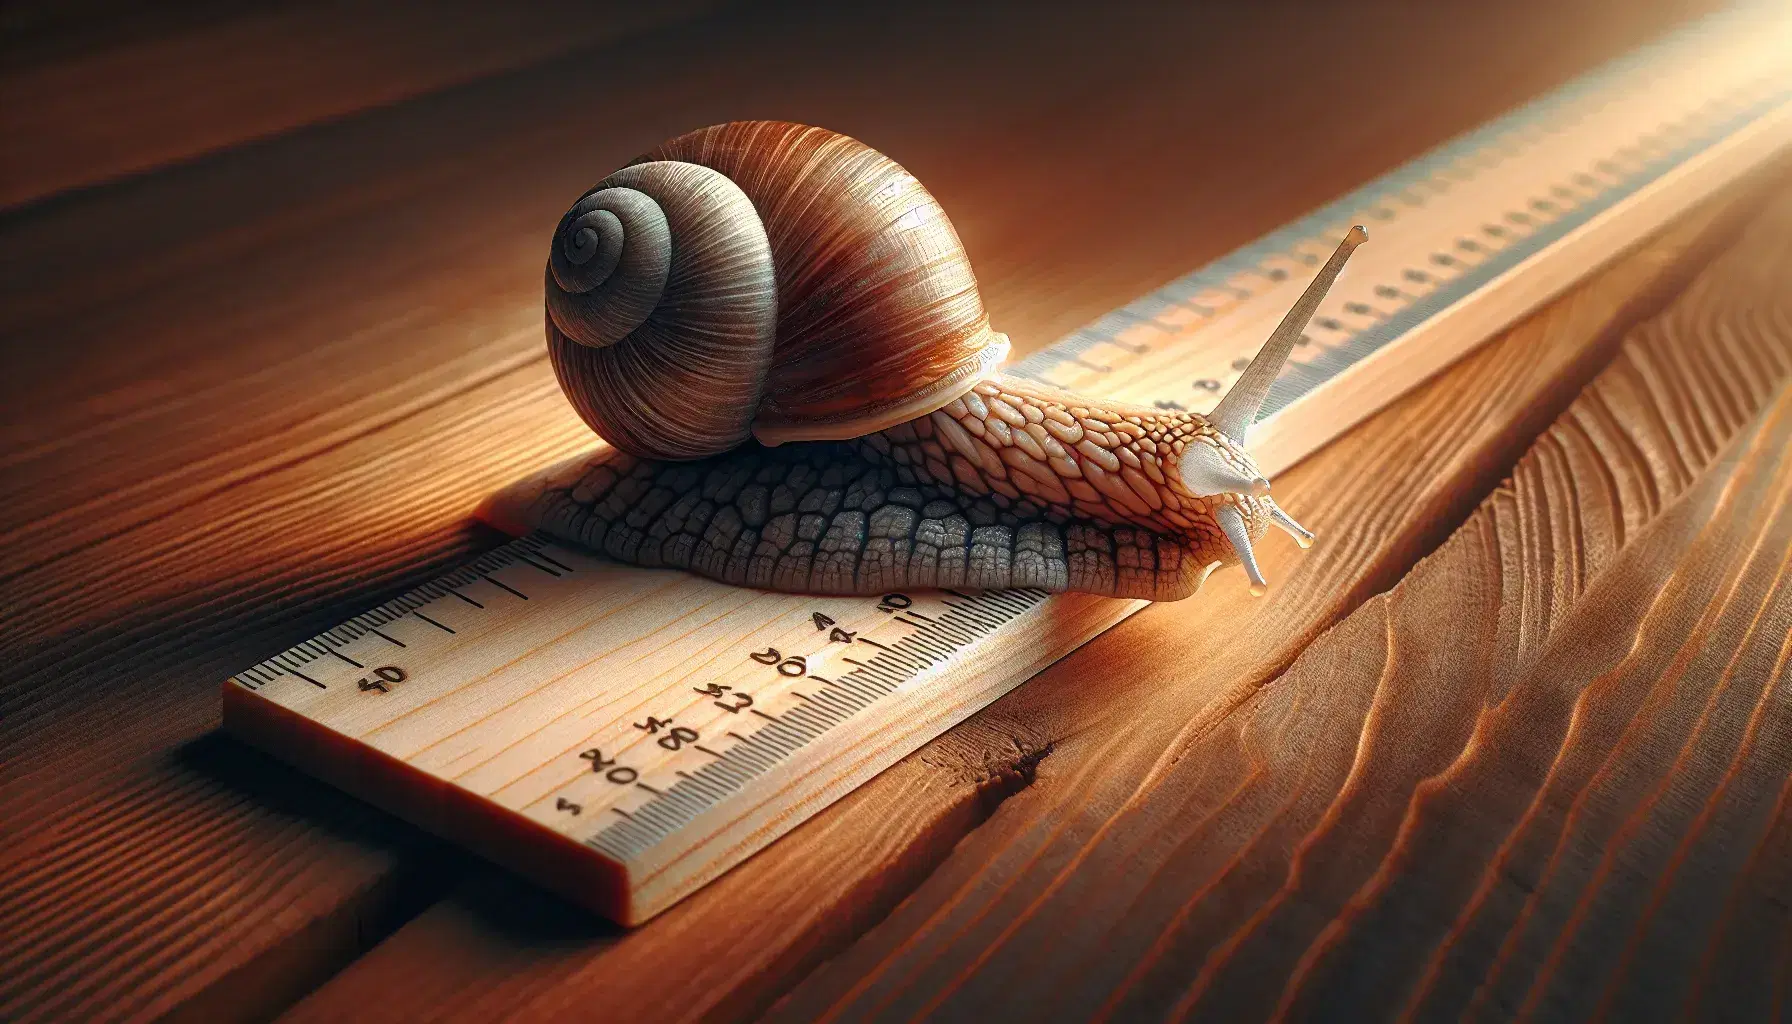 Close-up of a brown and tan spiral-shelled snail crawling on a wooden ruler's edge, with a blurred natural grain wood background.